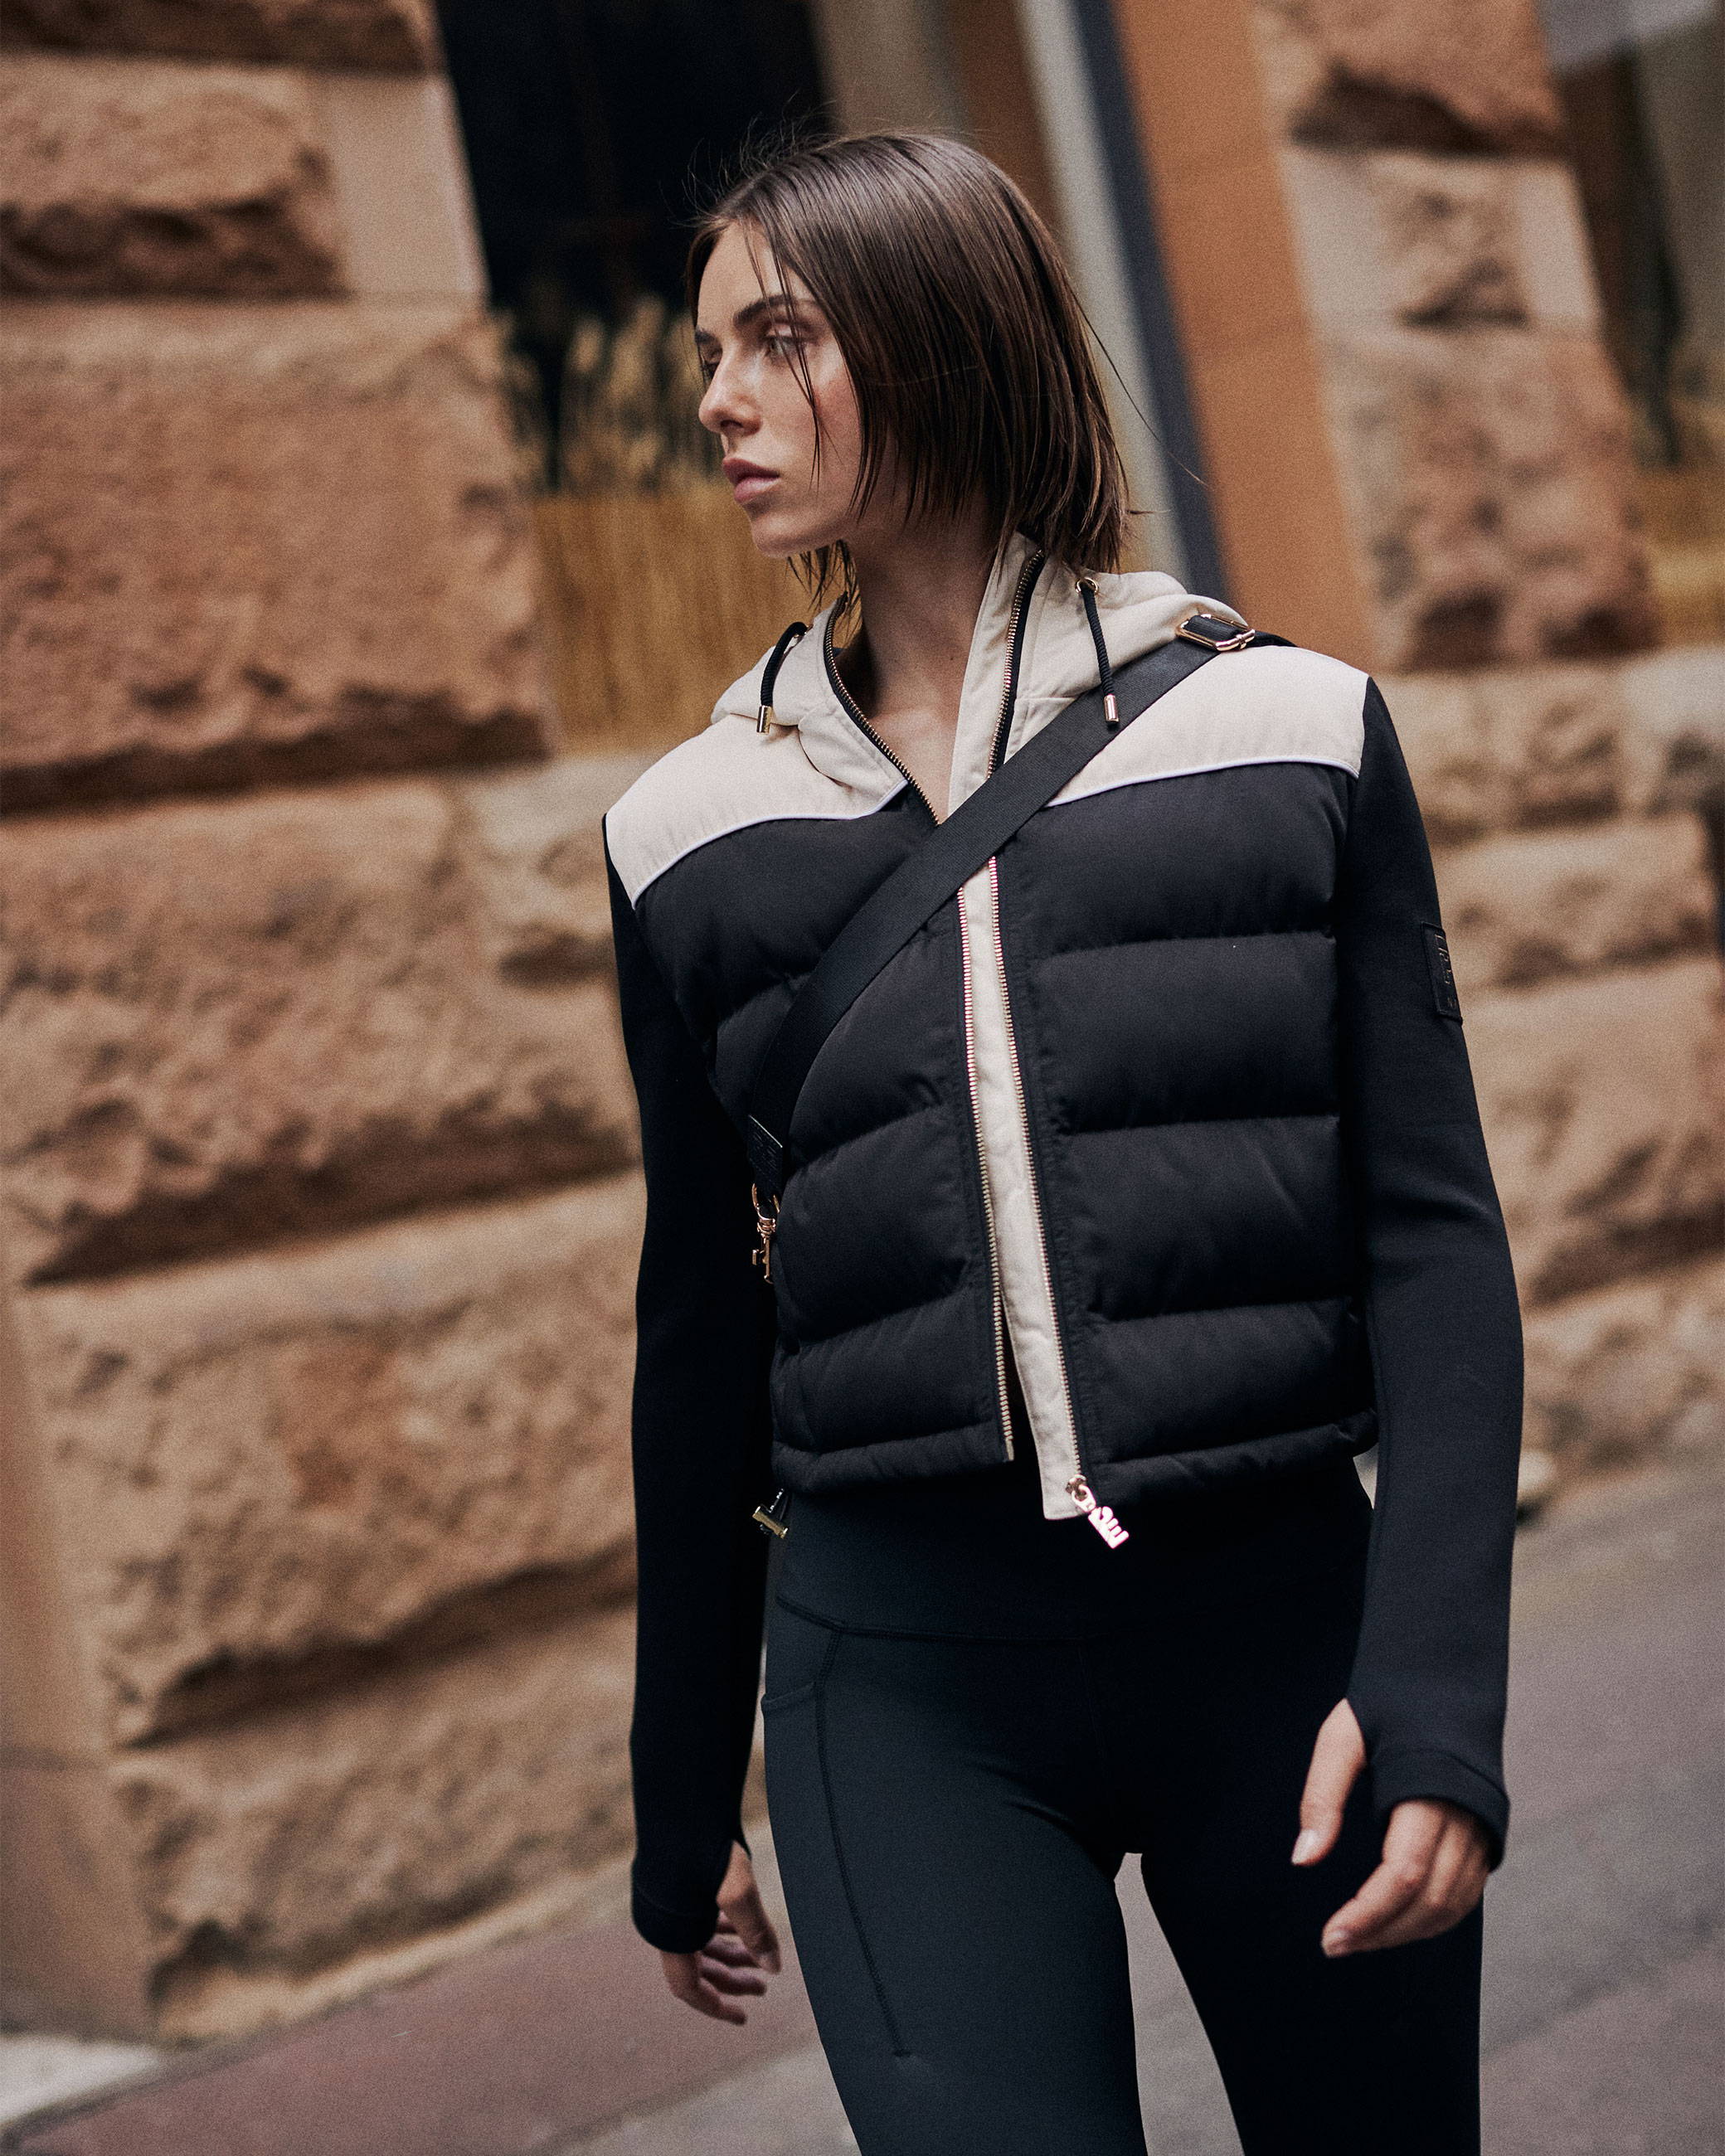 A girl is walking down a city street wearing activewear, a black and white jacket and a cross body bag, her look is active but elevated